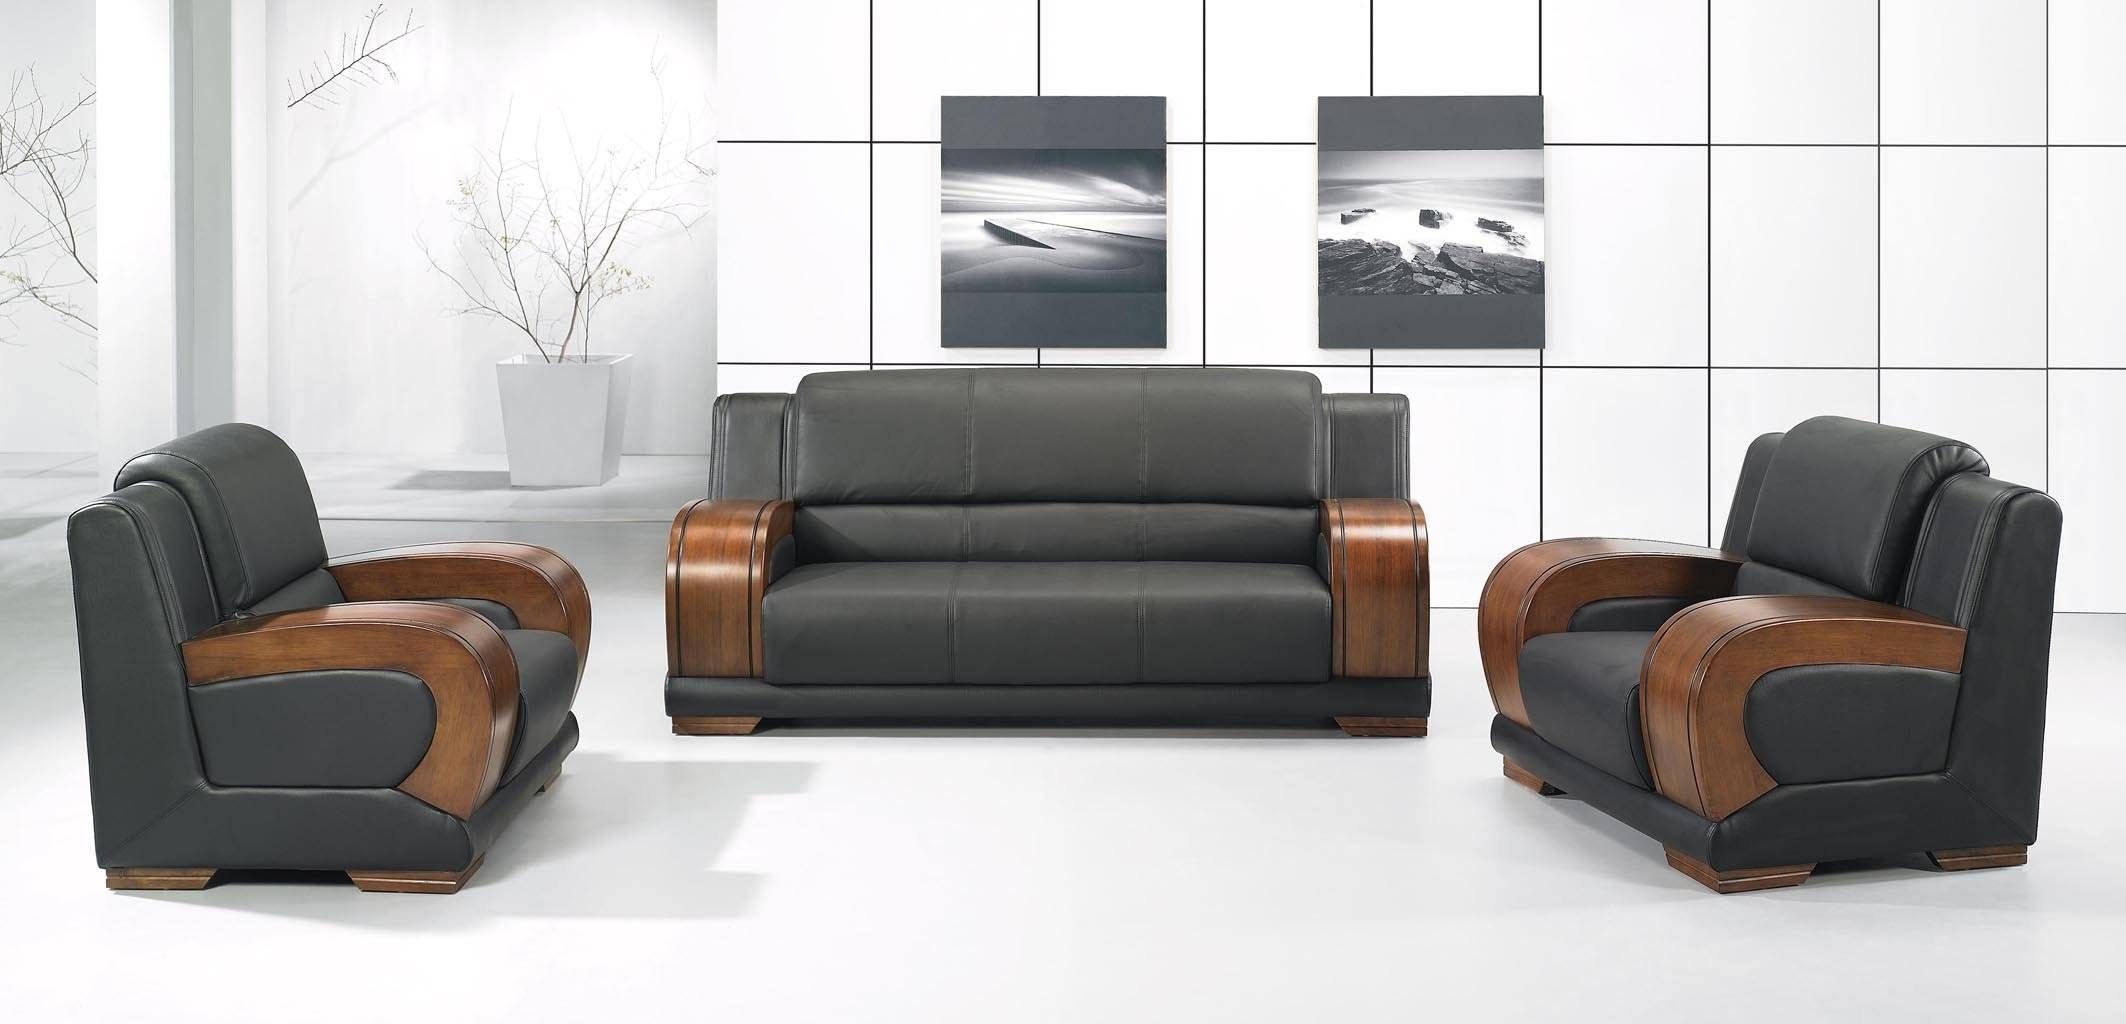 Office Furniture Sofas And Chairs | Sofas Decoration With Regard To Office Sofas And Chairs (View 4 of 15)